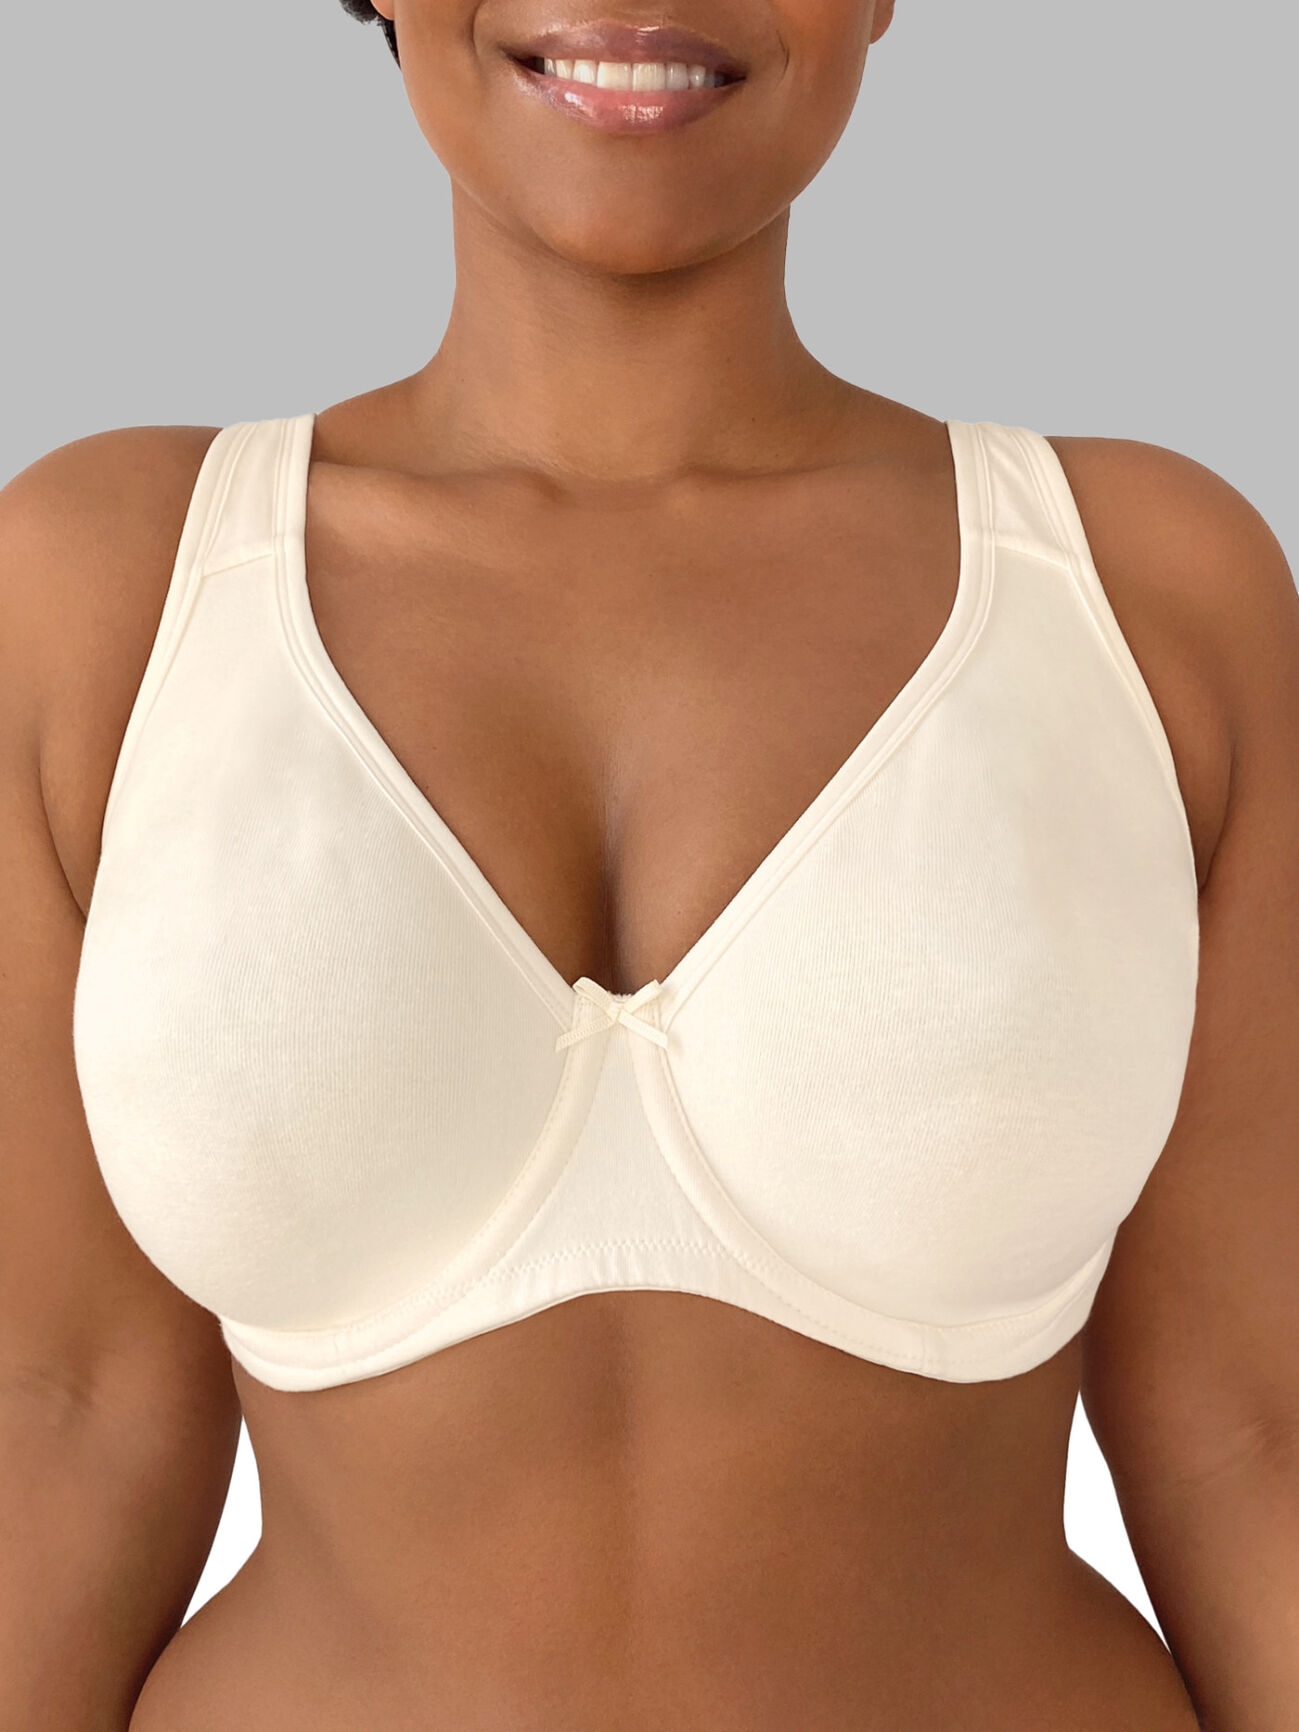 Bras in large sizes: perfect underwear for busty women